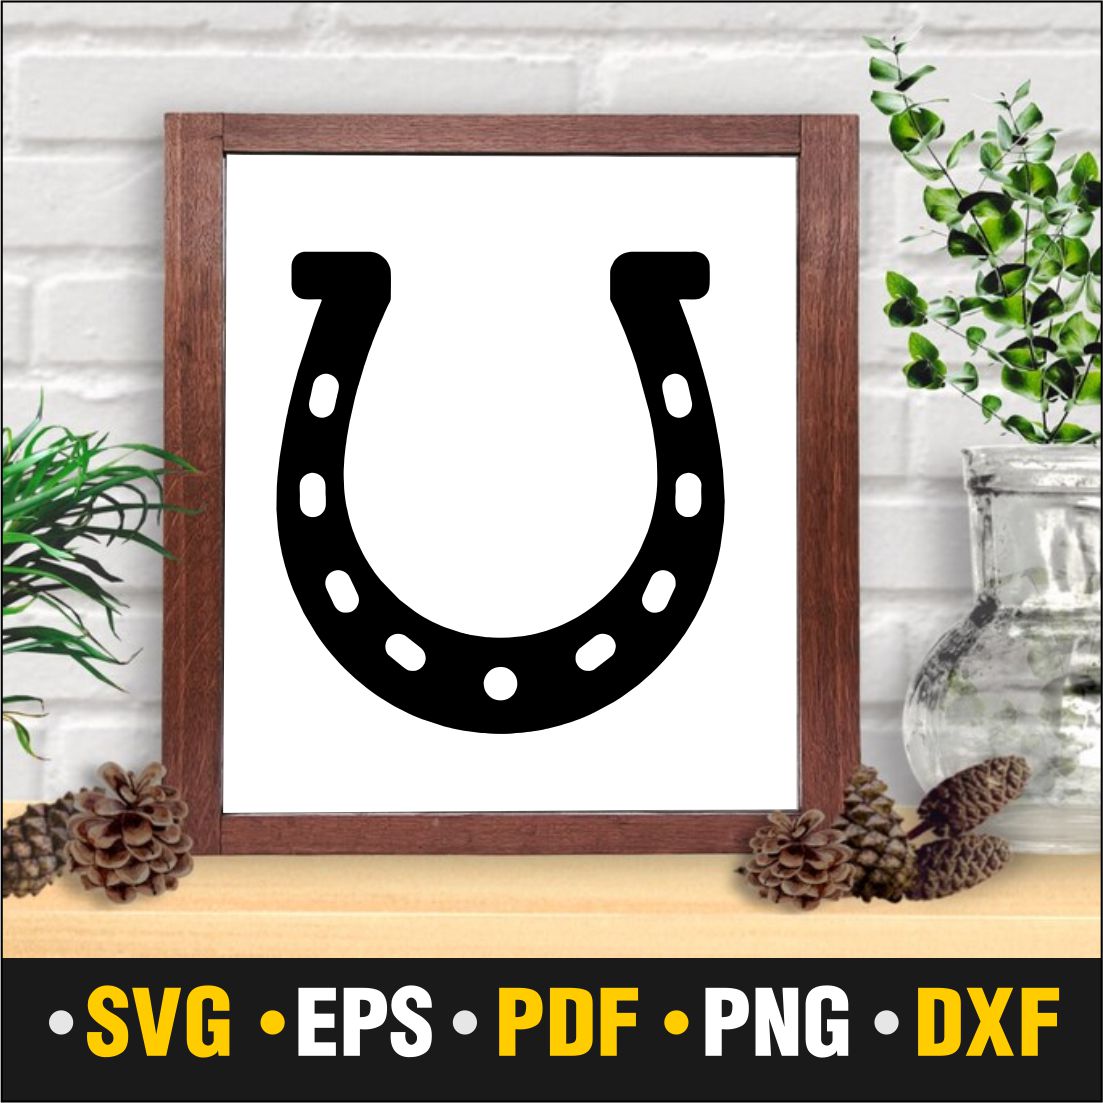 Picture of a picture of a horseshoe.